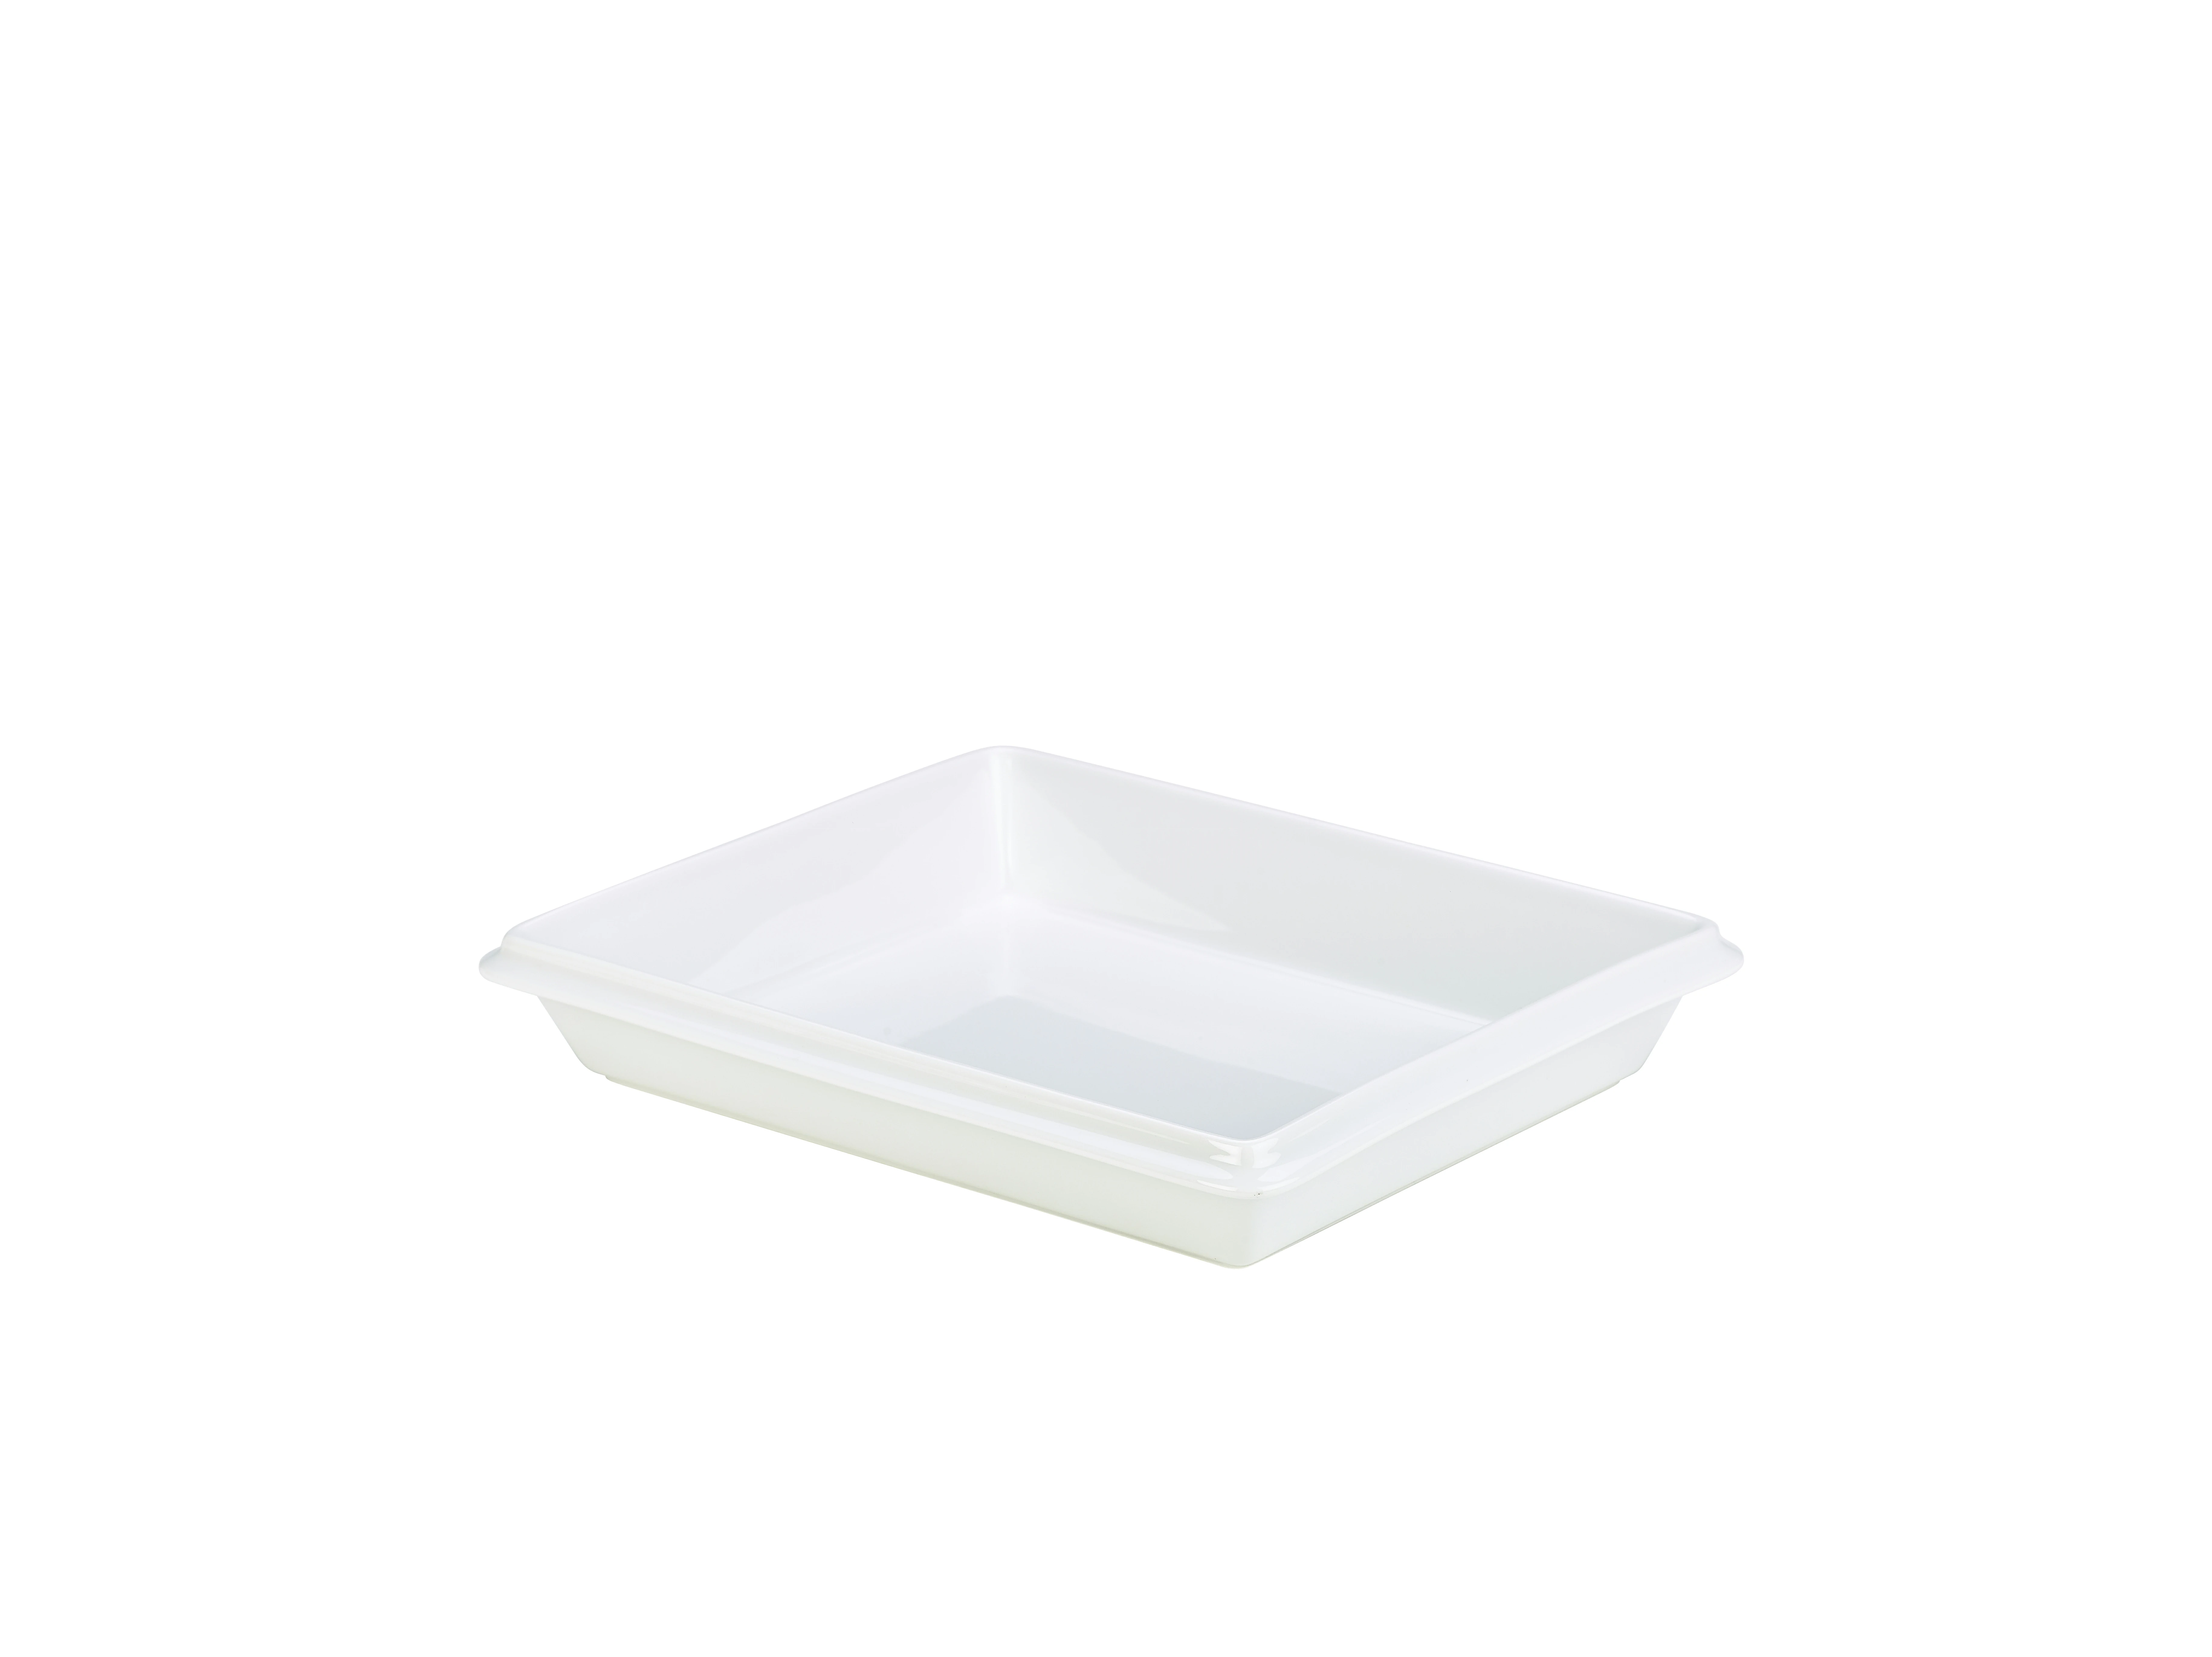 GenWare Gastronorm Dish GN 1/2 55mm